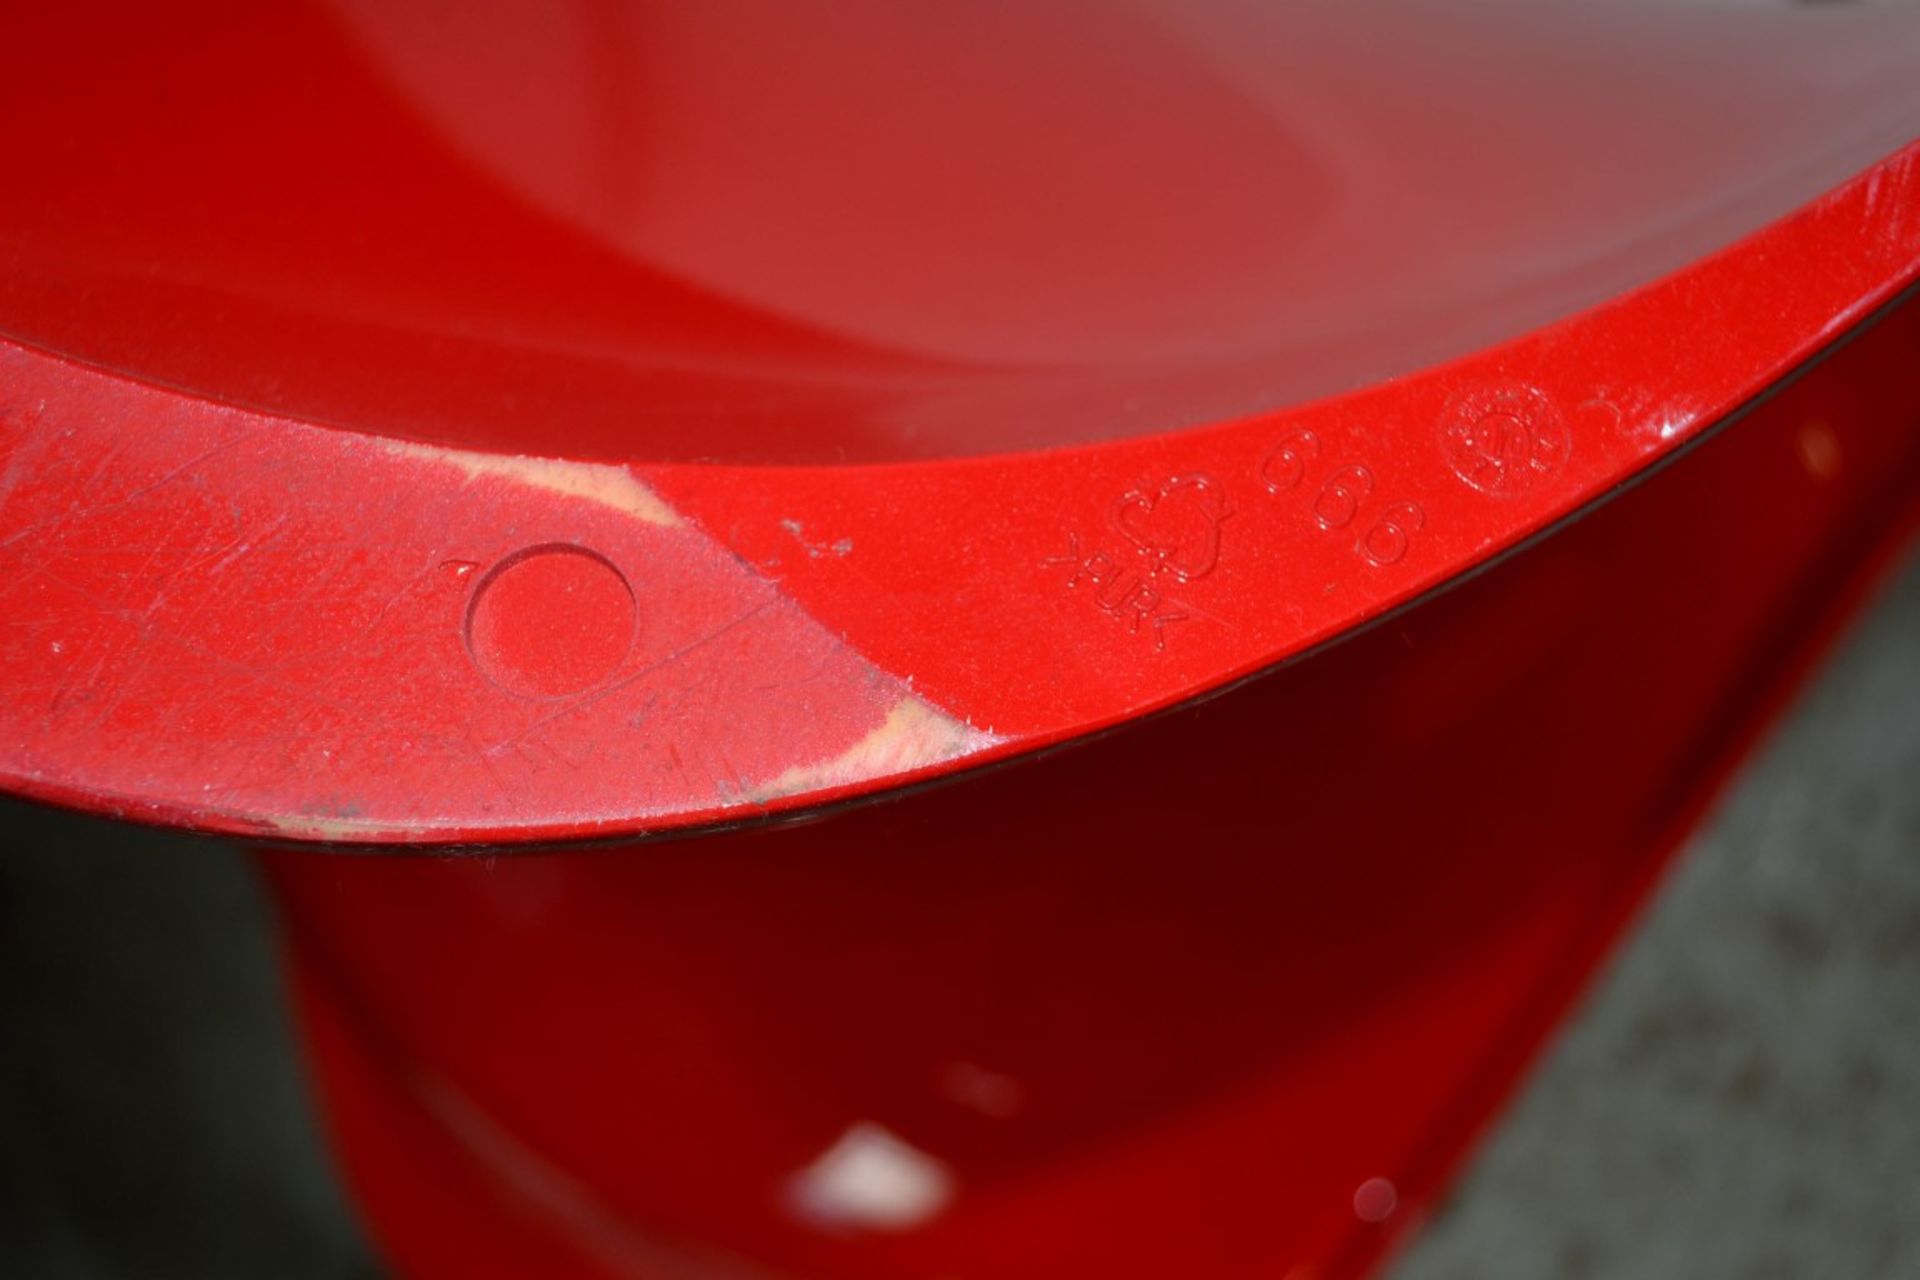 1 x VITRA Panton Chair In Classic Red - Measurements: W50 x D60 x H83cm, Seat Height: 41cm - - Image 6 of 8